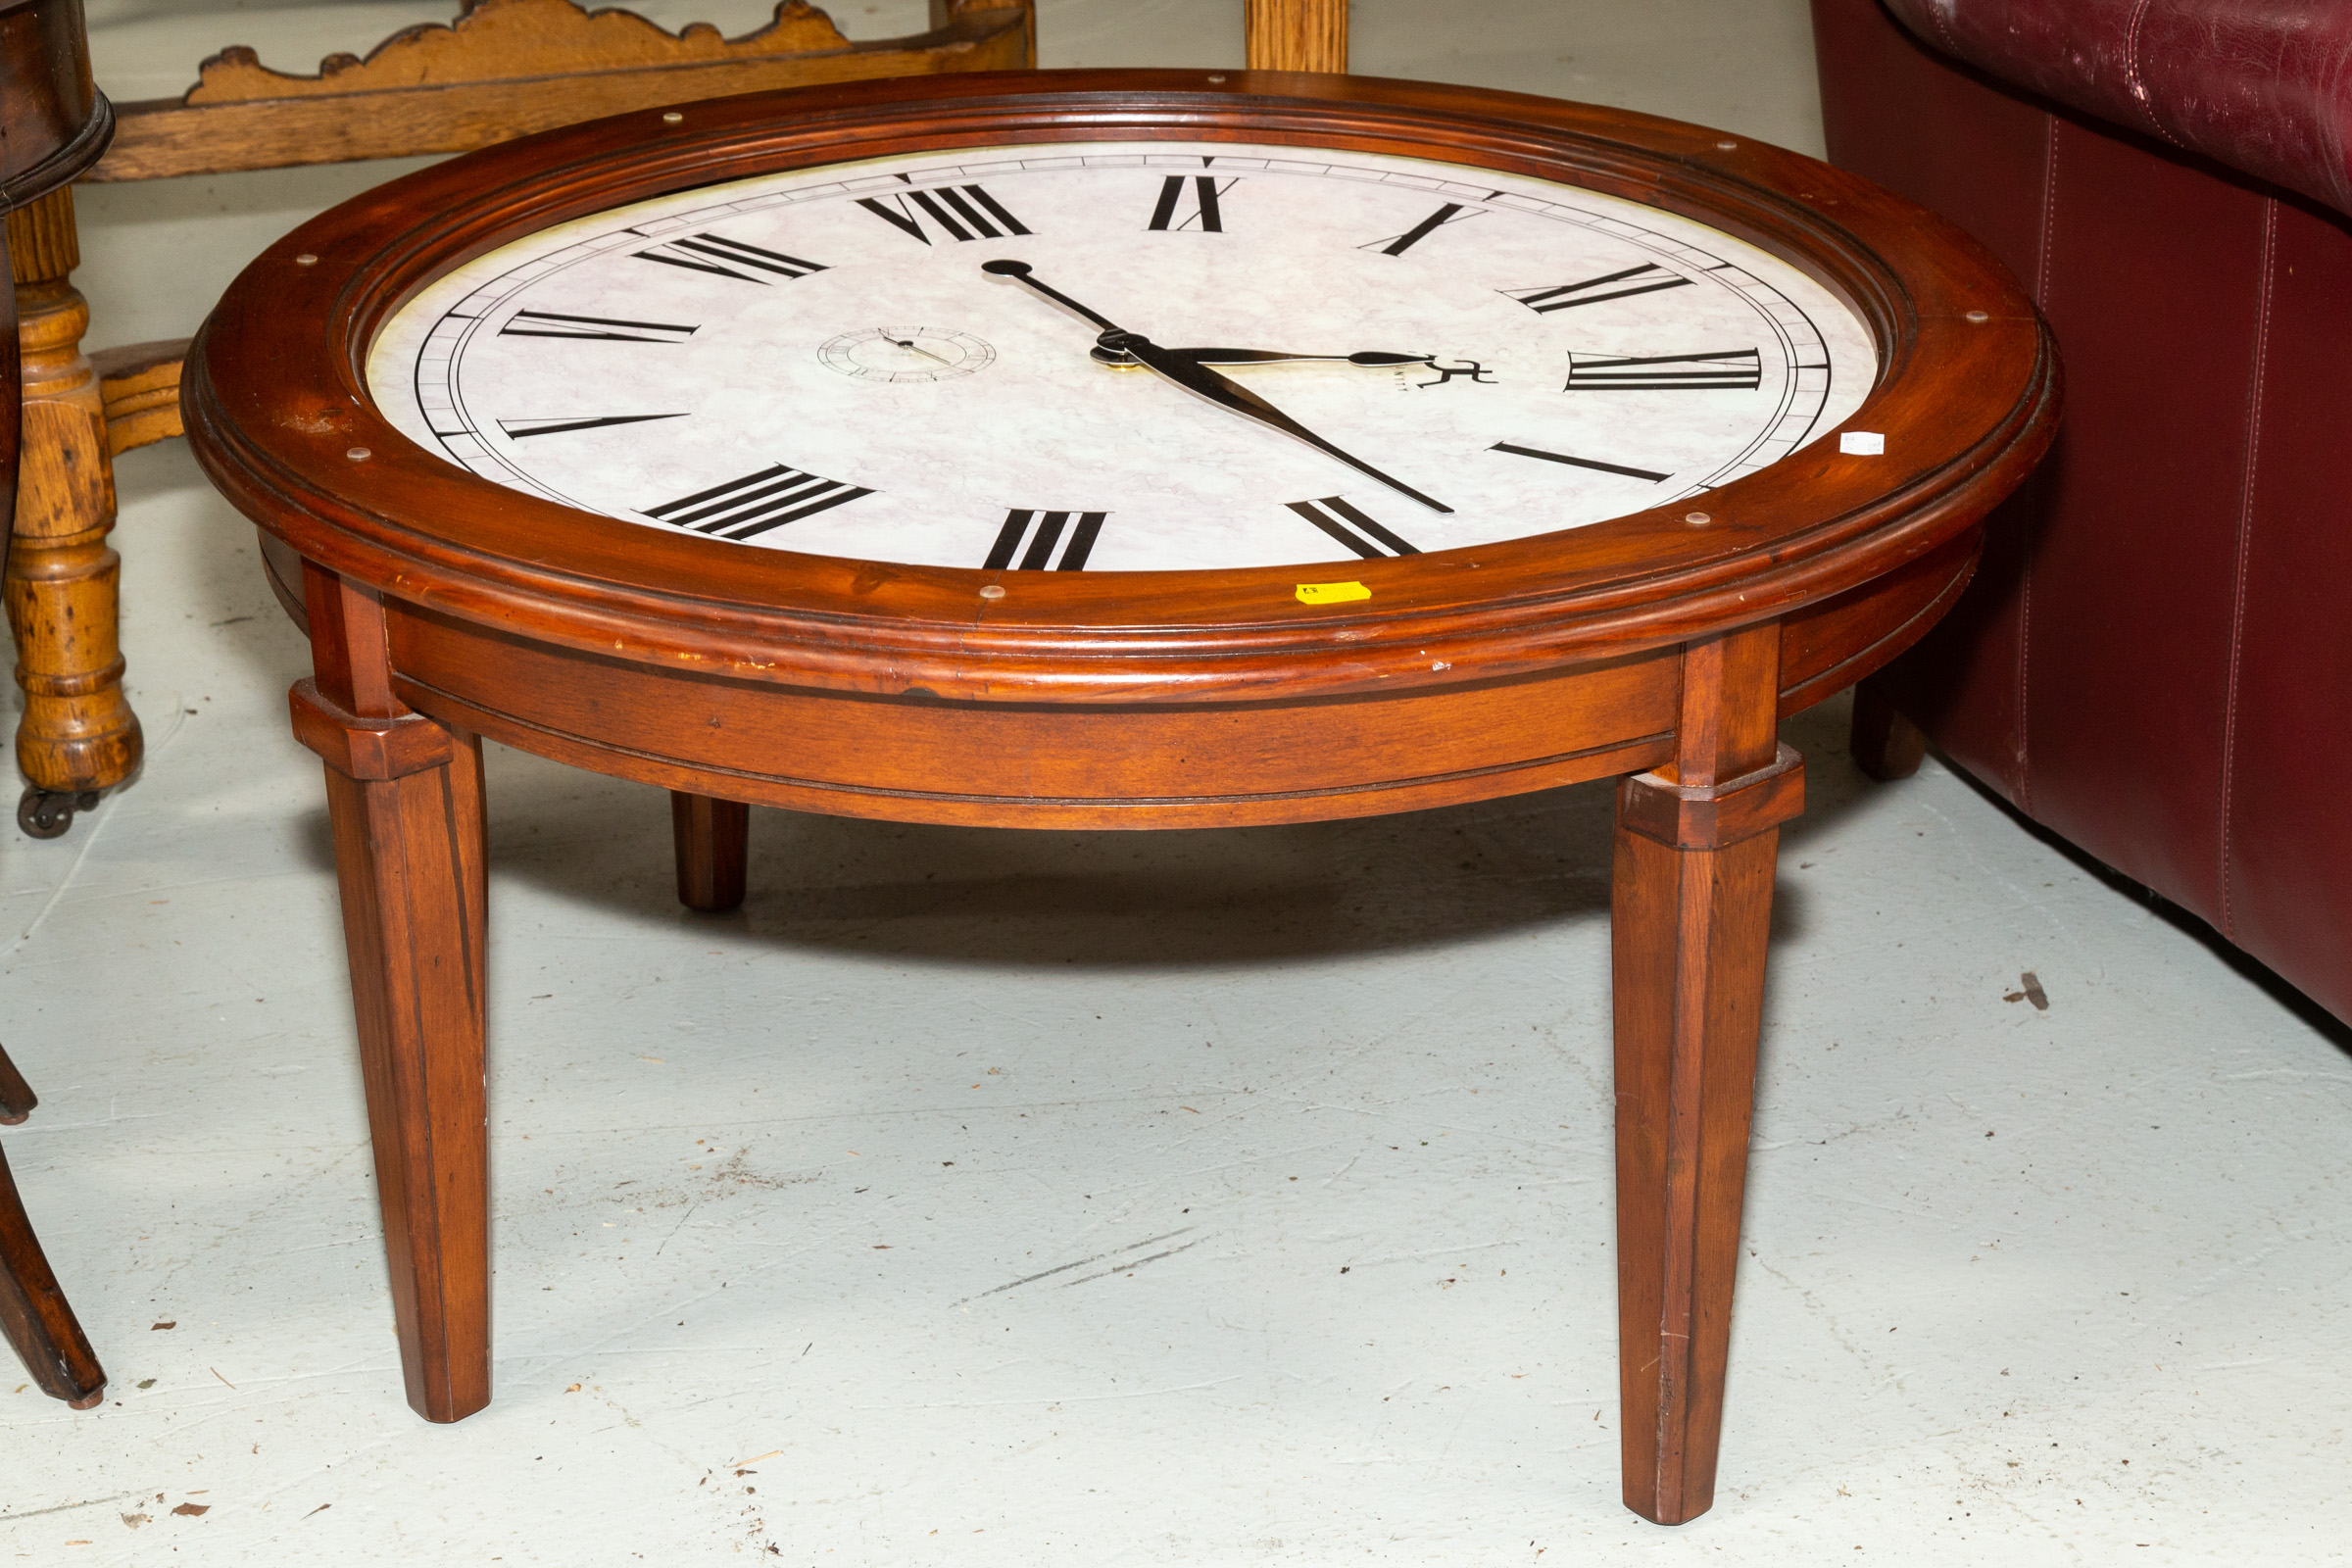 CHERRY COFFEE TABLE WITH CLOCK 338b98